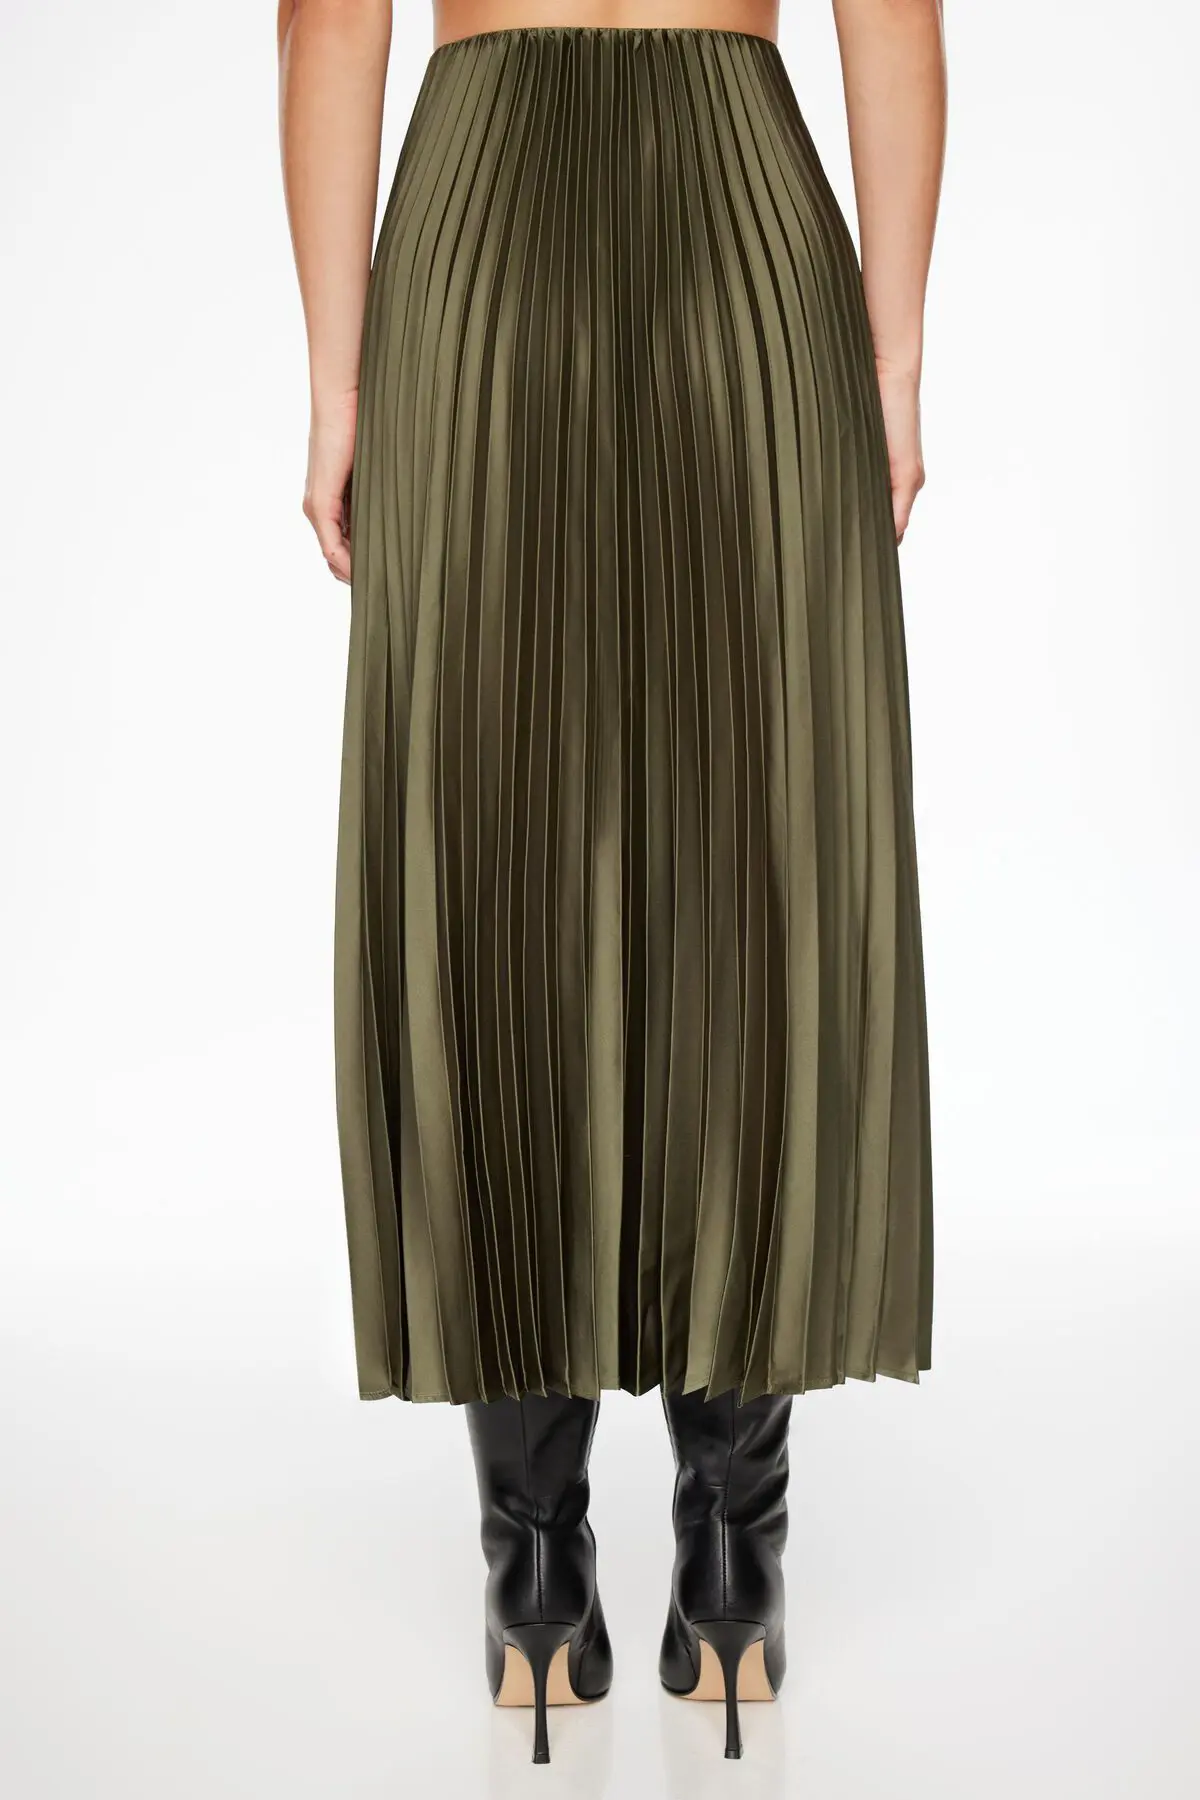 Dynamite Laure Pleated Maxi Skirt. 3